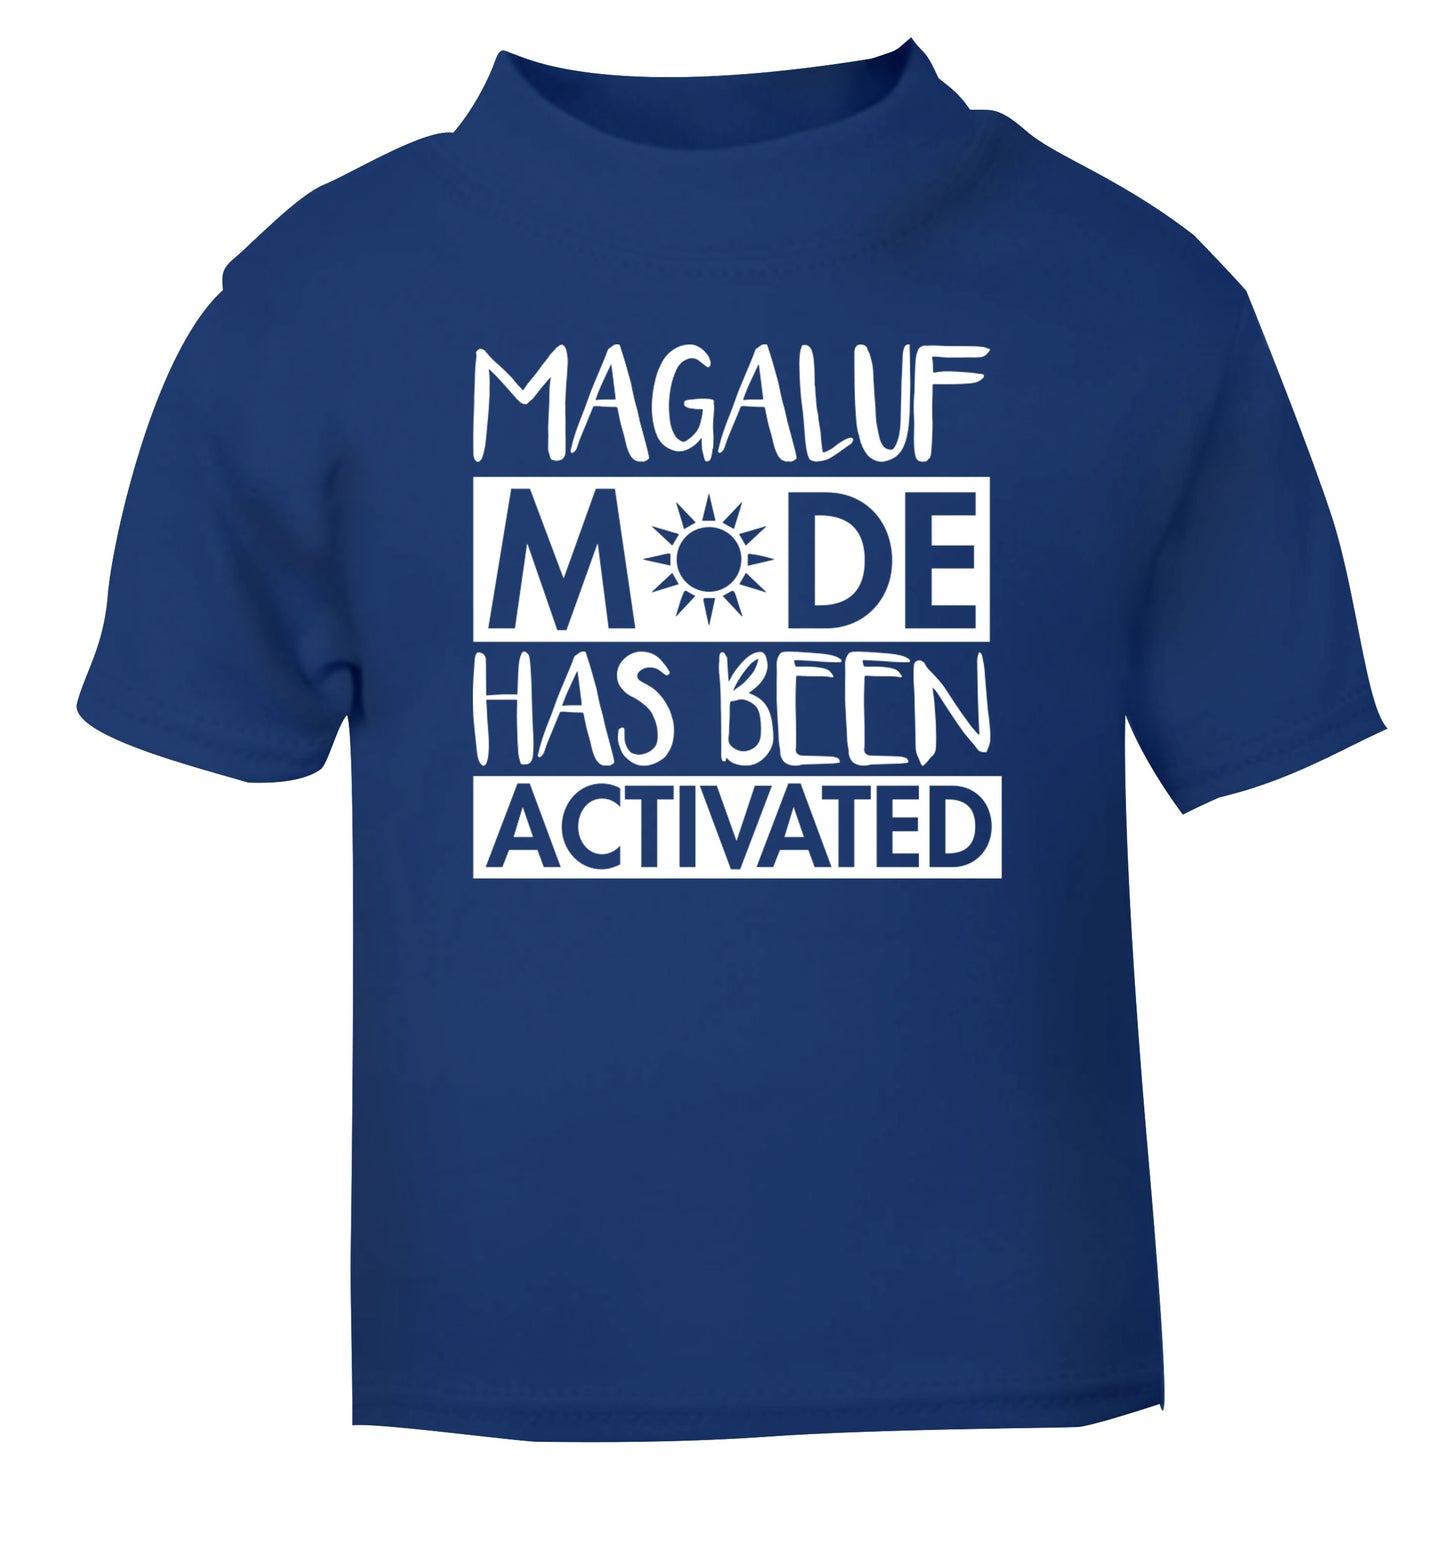 Magaluf mode has been activated blue Baby Toddler Tshirt 2 Years